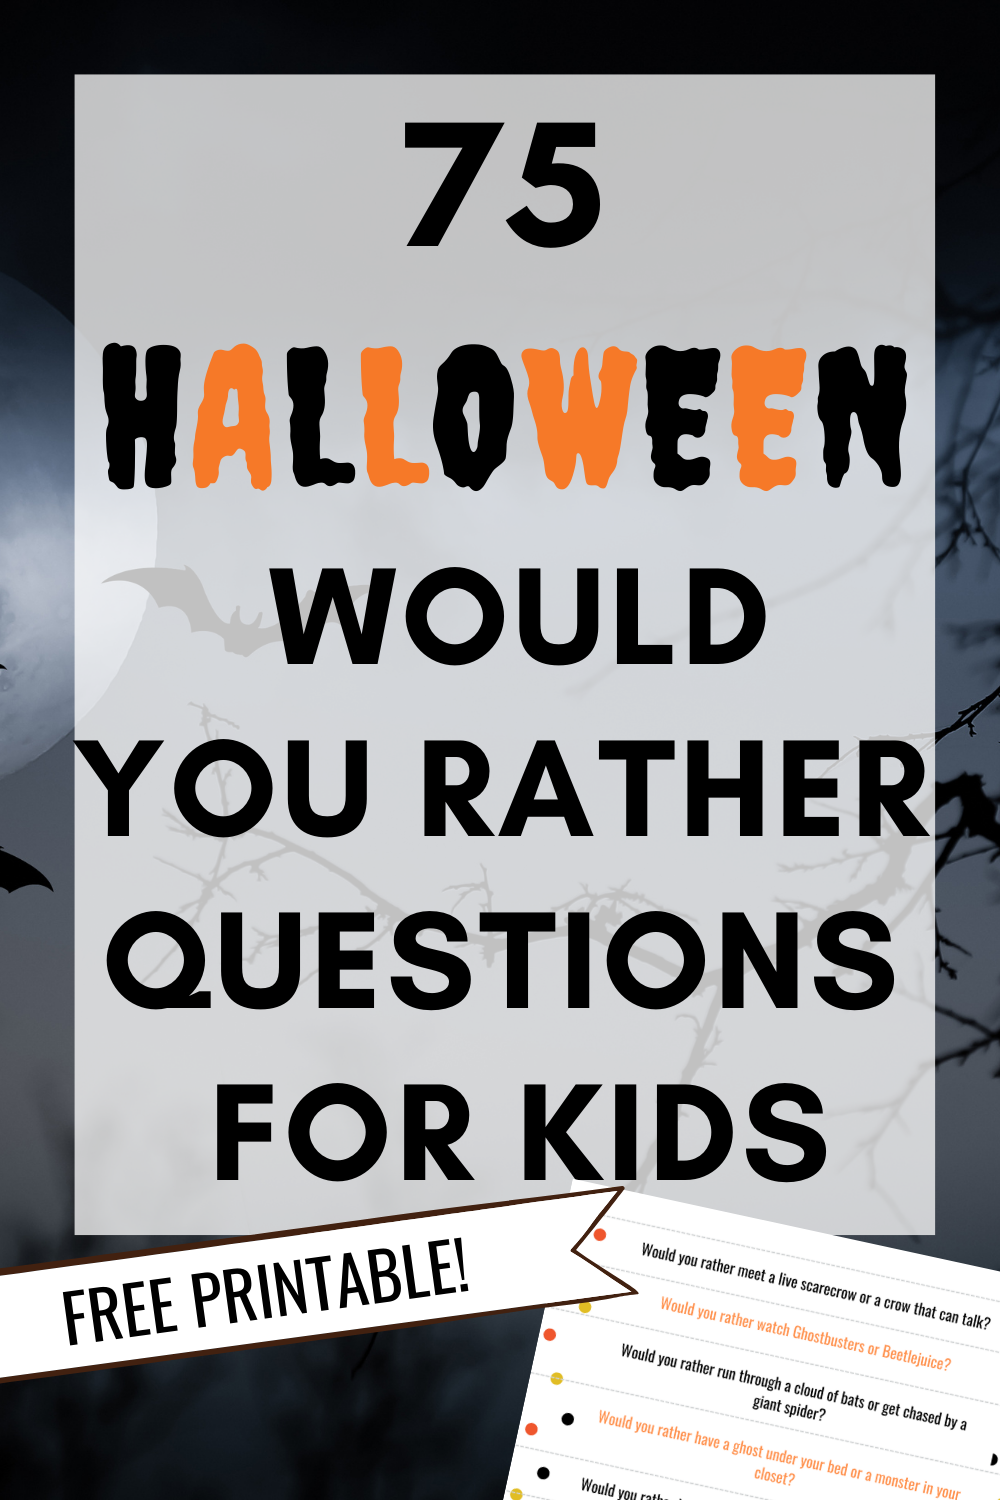 75 Awesome Halloween Would You Rather Questions to Ask Your Kids